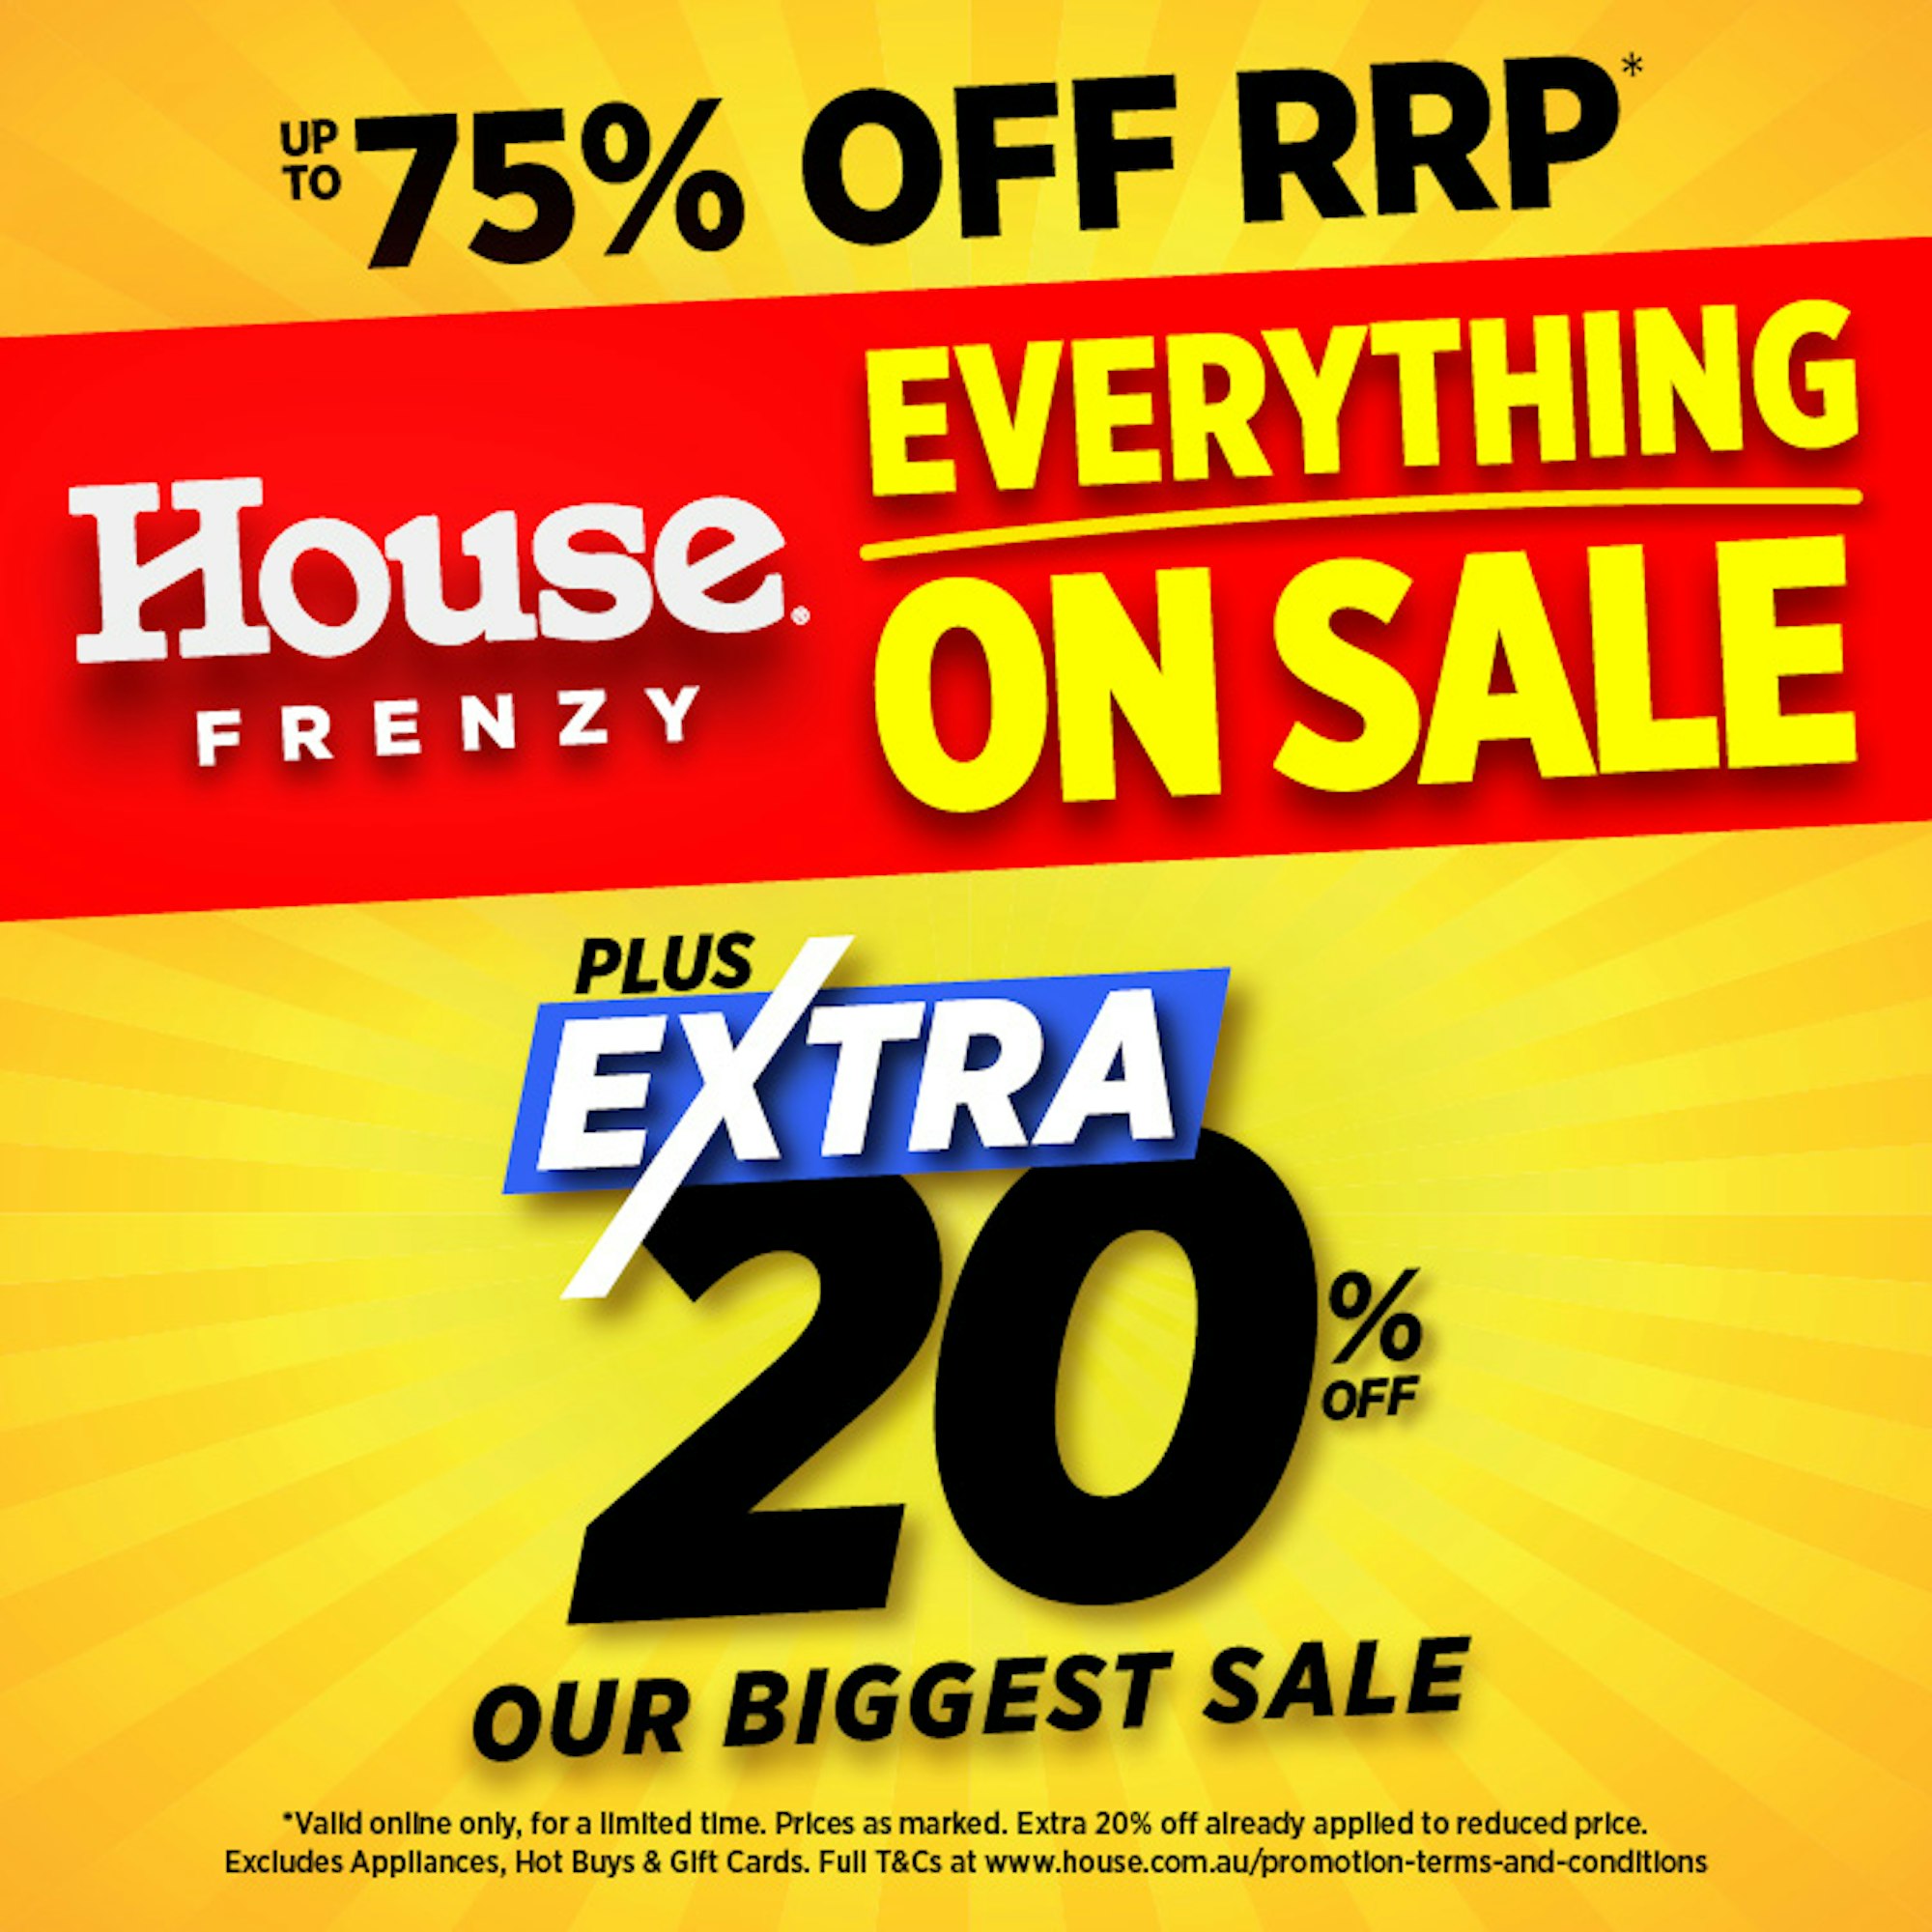 HOUSE FRENZY EXTRA 20% OFF